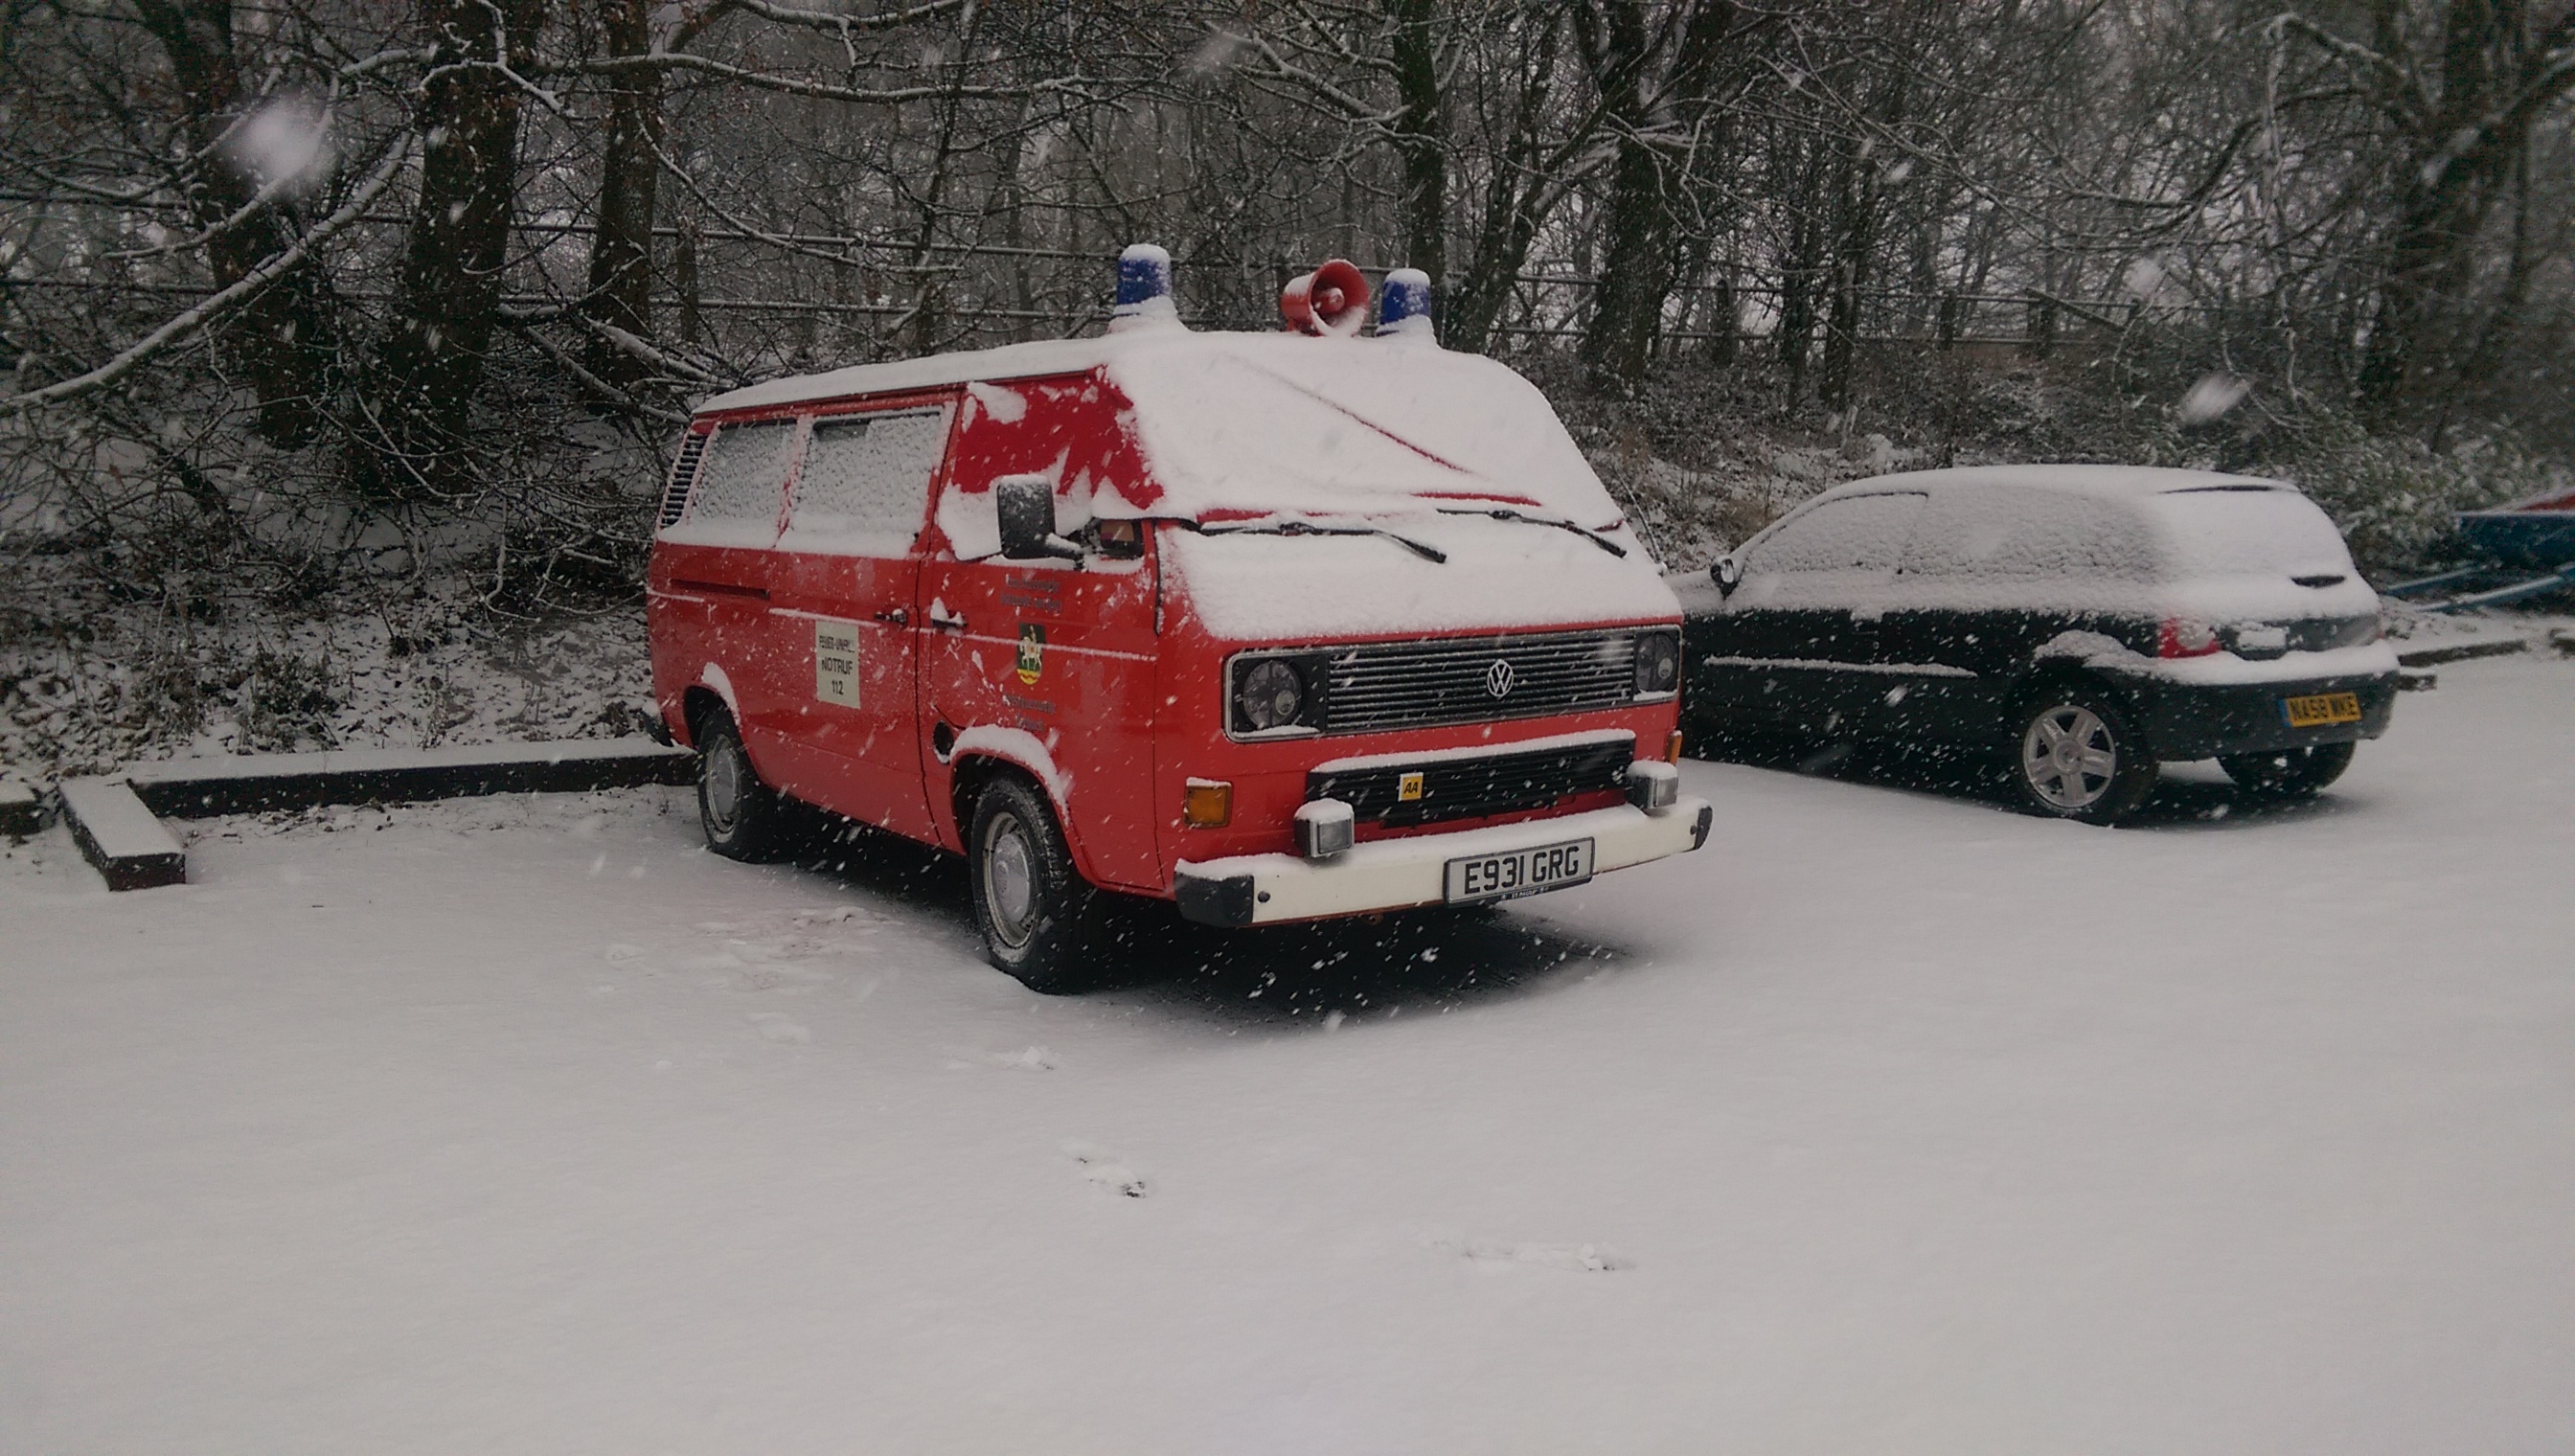 A red fire truck parked in the snow